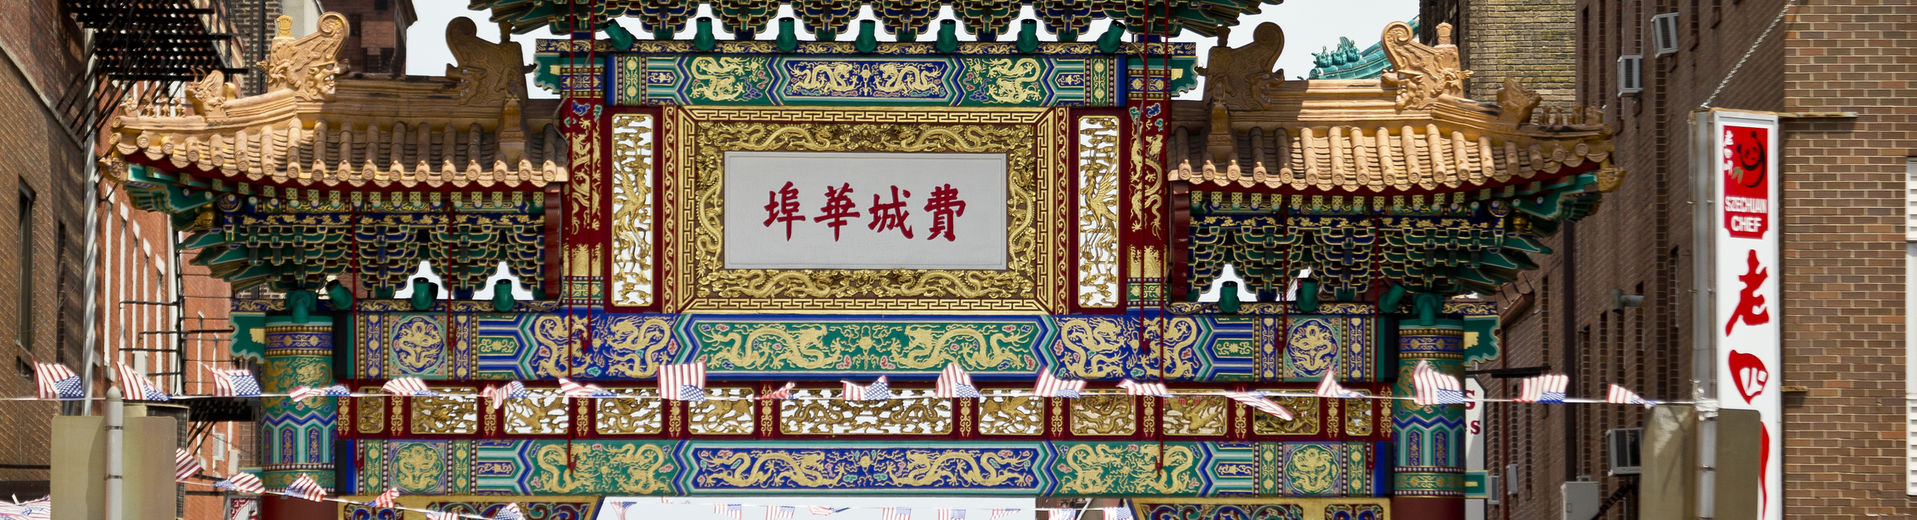 Ornate and colorful architecture in Philadelphia's Chinatown neighborhood.